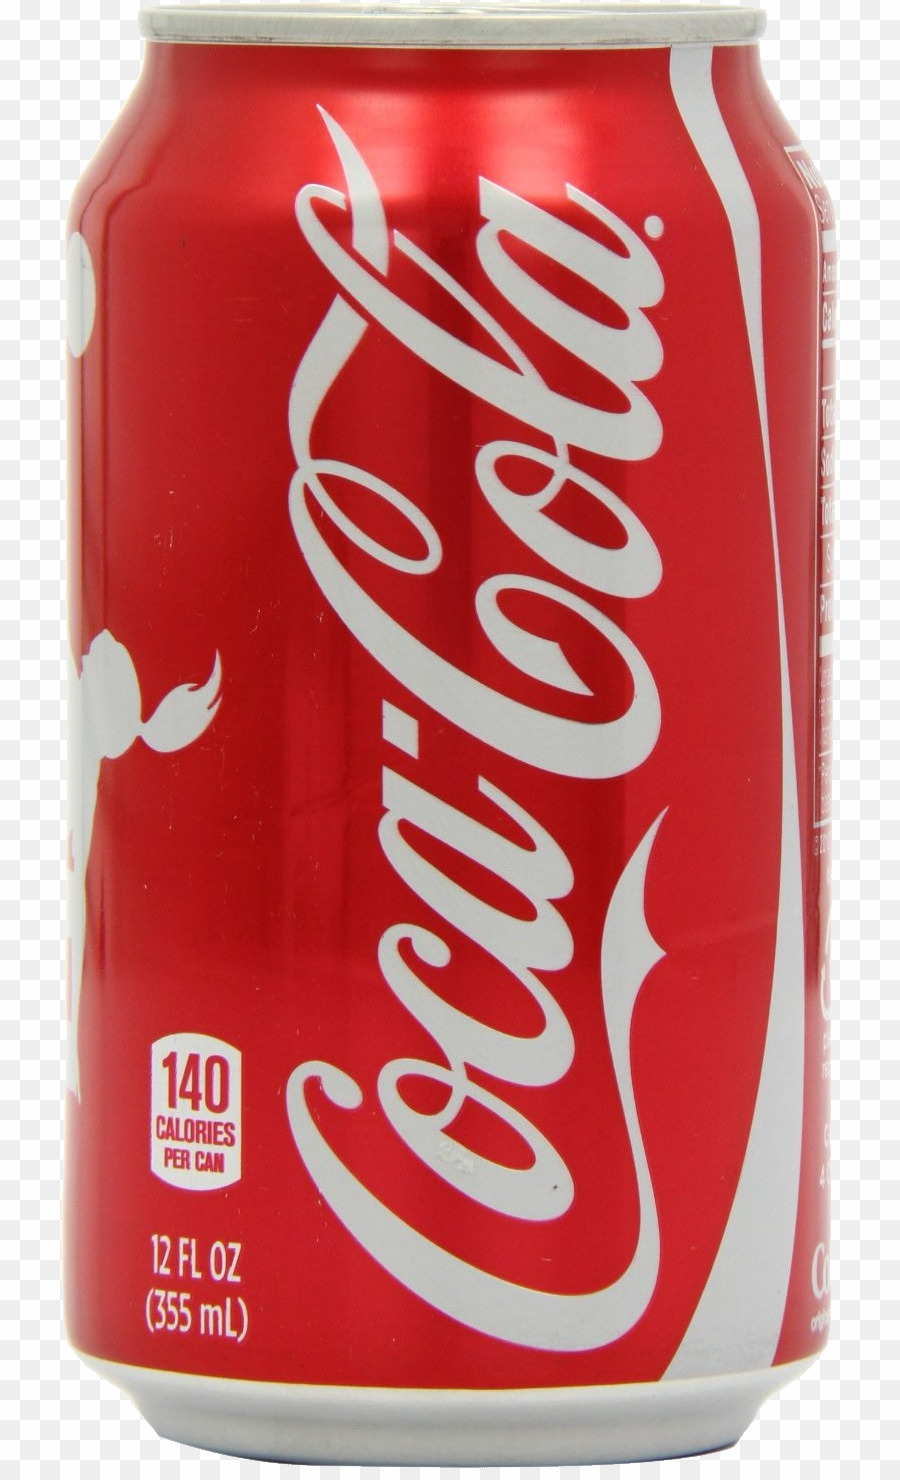 Coke can png.